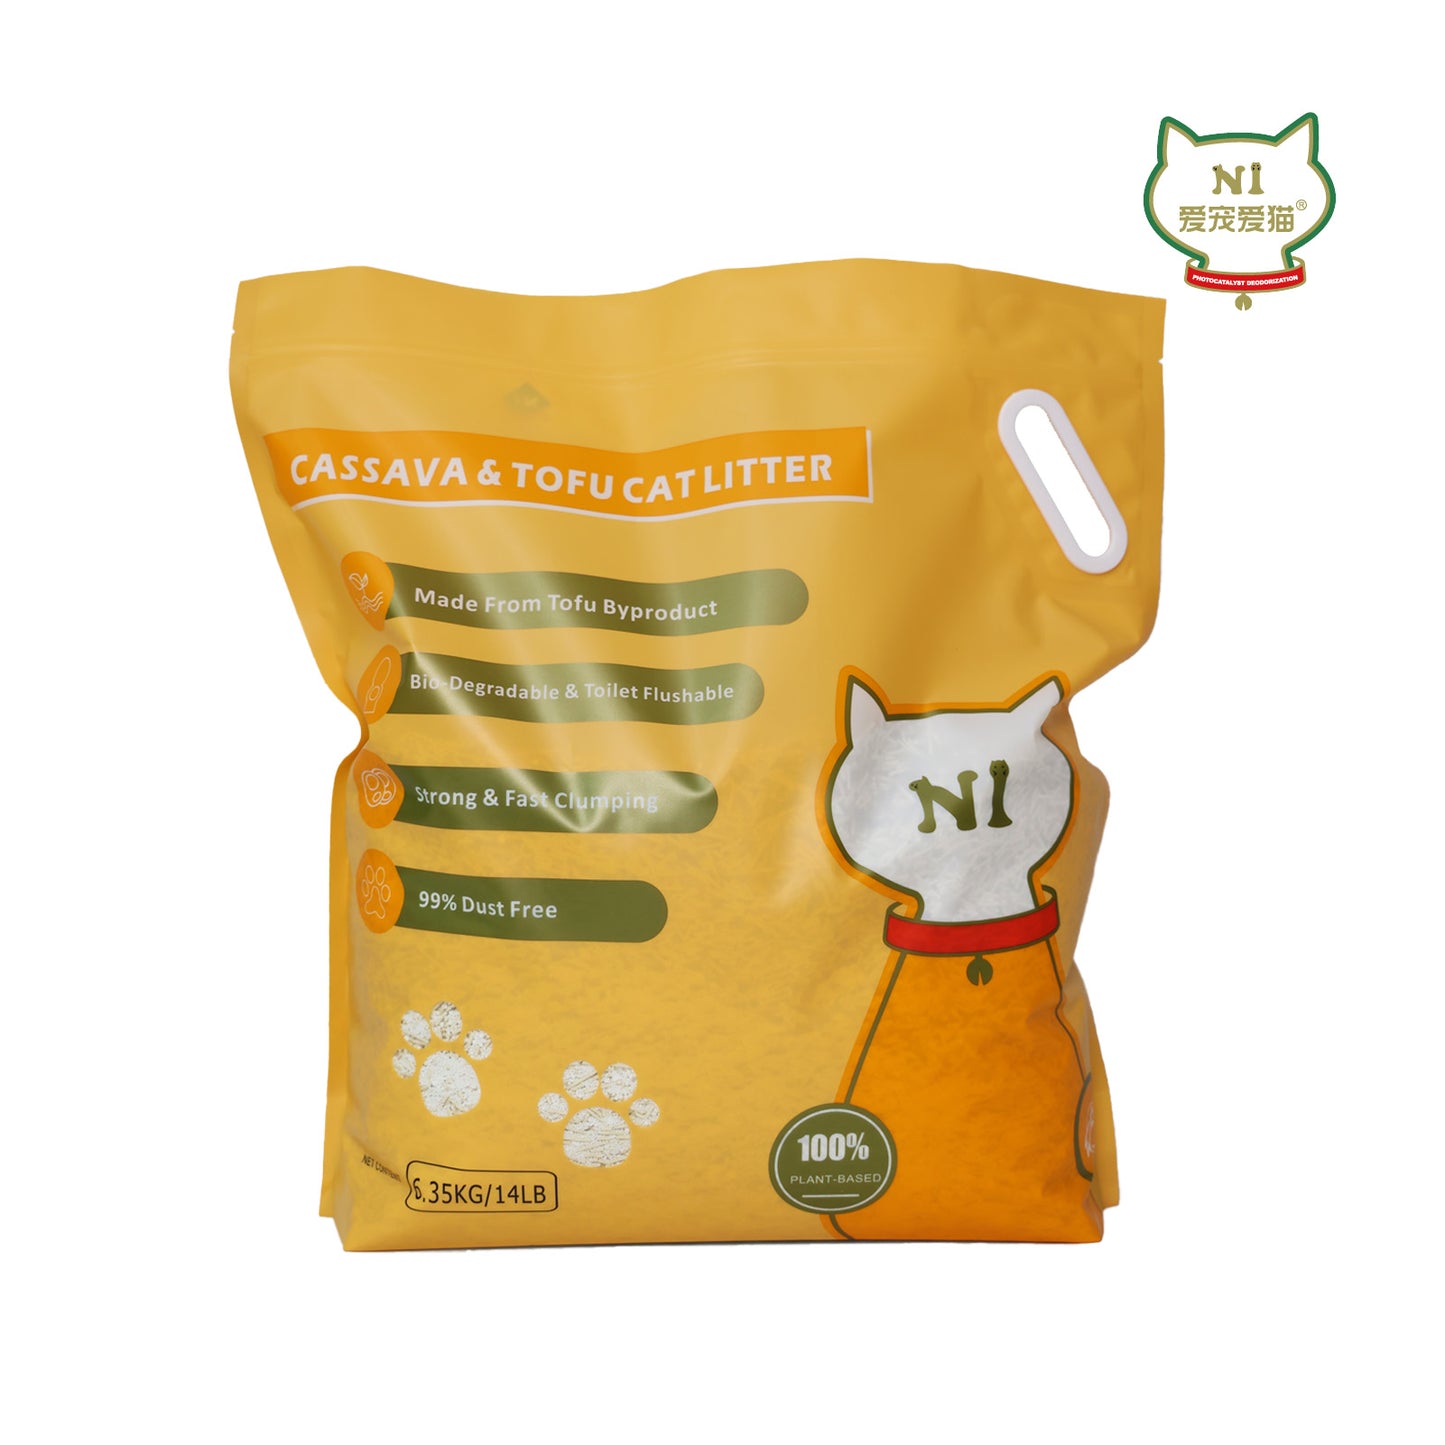 N1 Tofu & Cassava Cat Litter - New Product Sales | Flushable | 99% Dust Free | Superb Clumping | Eliminate 96% of Ammonia | Plant Based | Low Tracking (14lb)